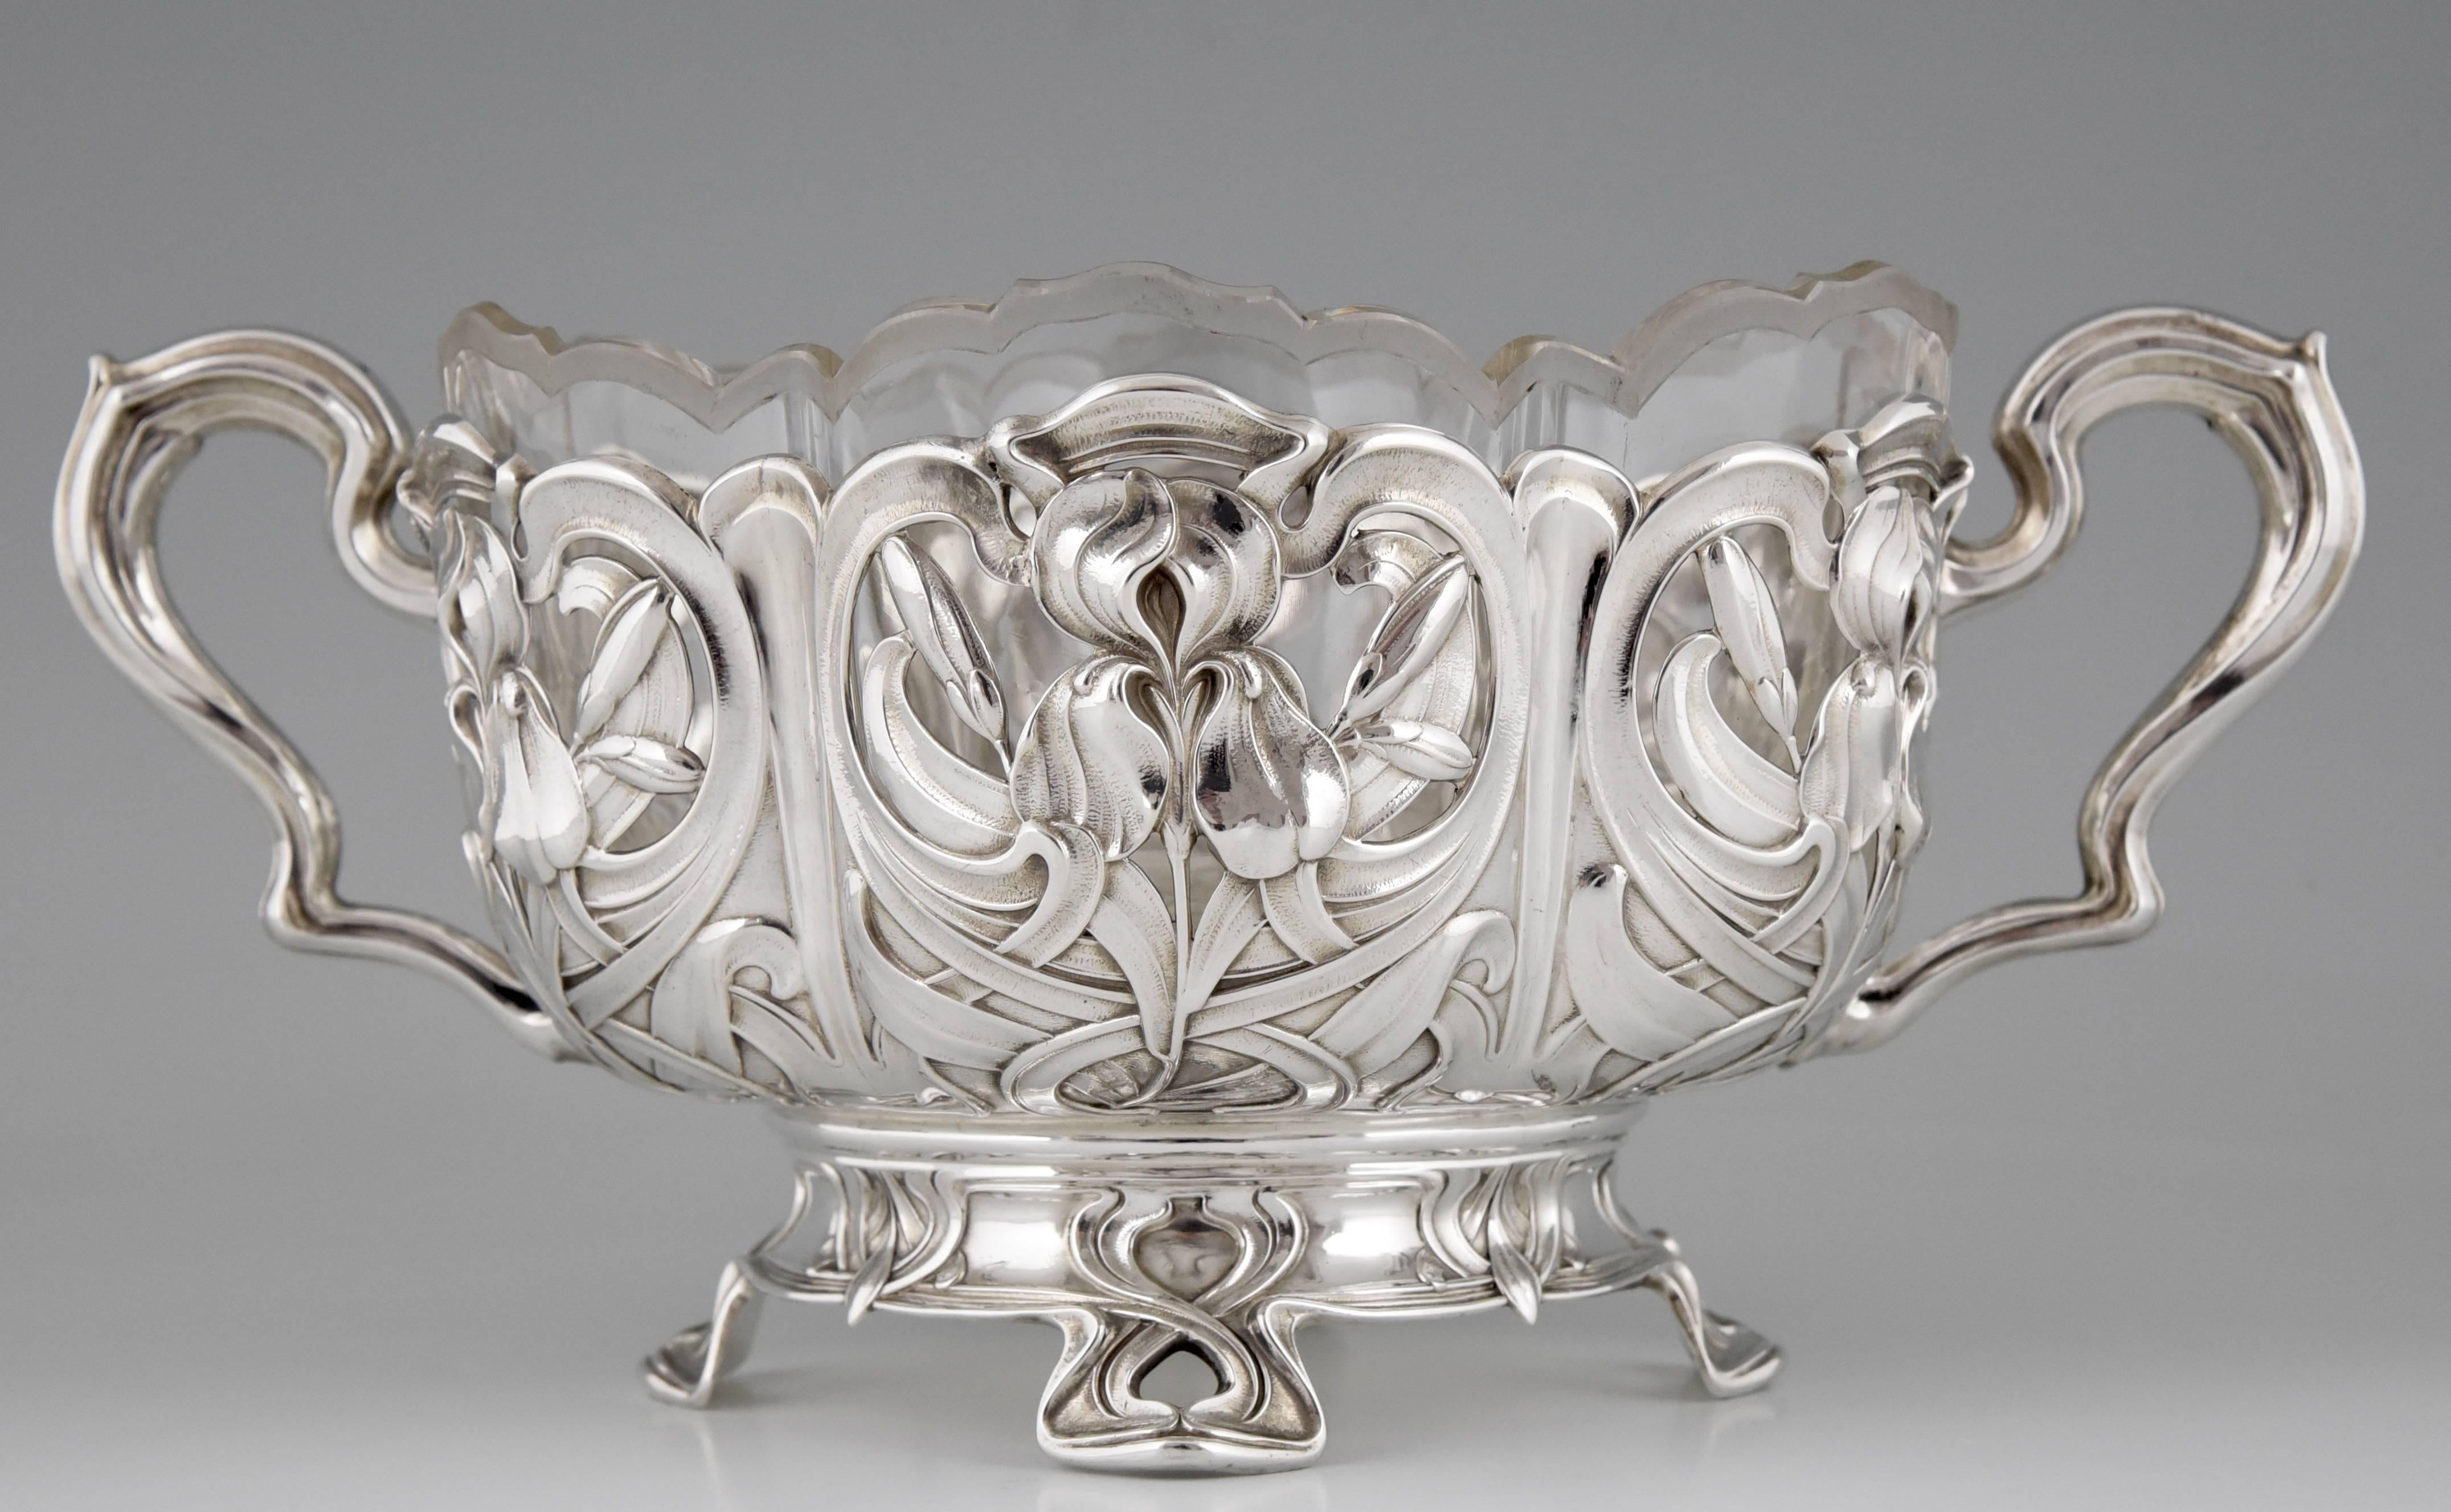 20th Century German Art Nouveau silver flower dish with glass liner by A. Strobl, 1900.